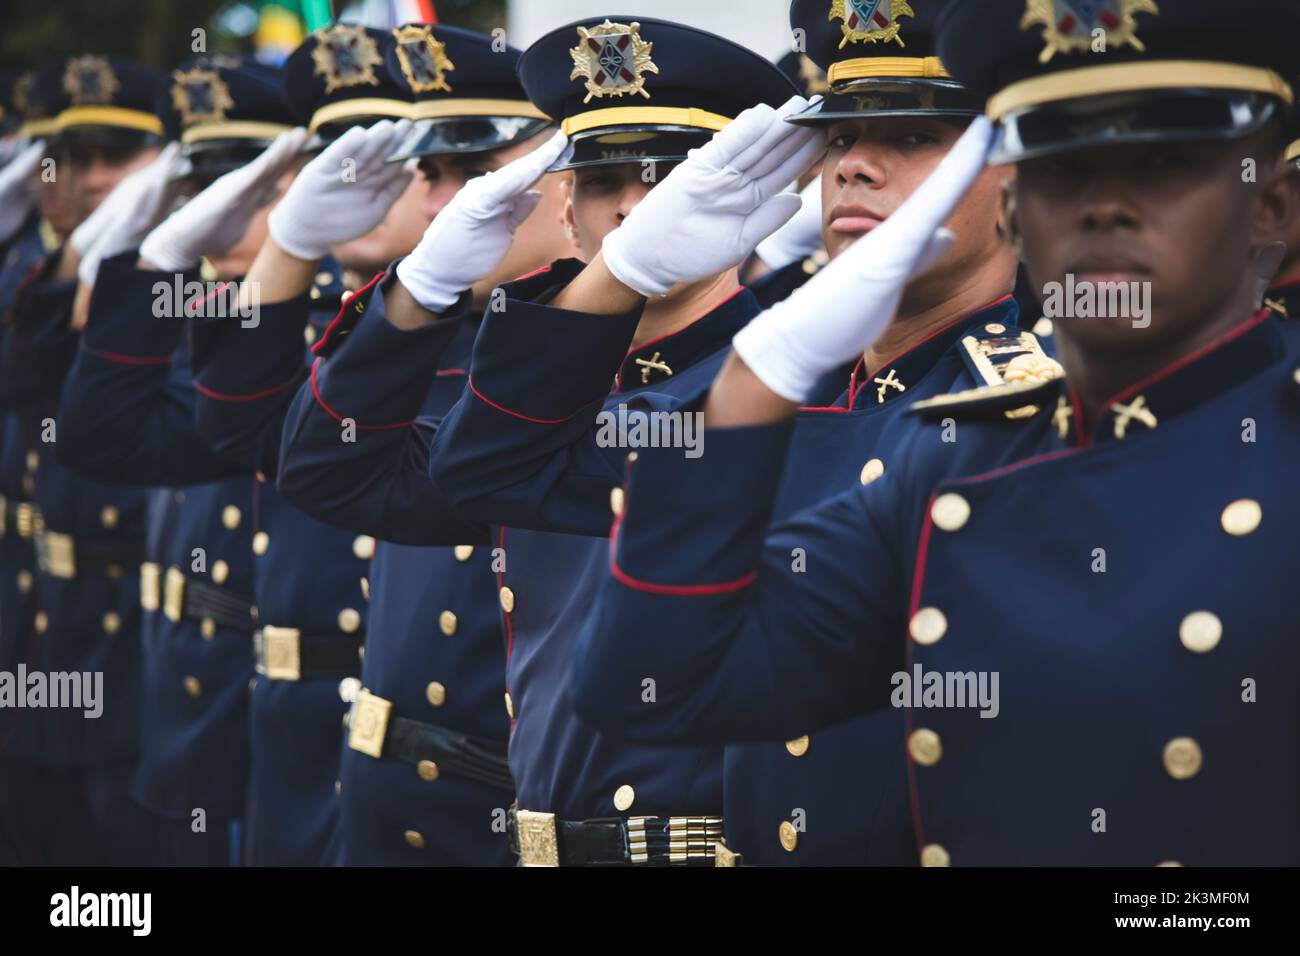 Salvador, Bahia, Brazil - September 7, 2016: Military personnel in formation during a military parade commemorating the independence of Brazil in the Stock Photo